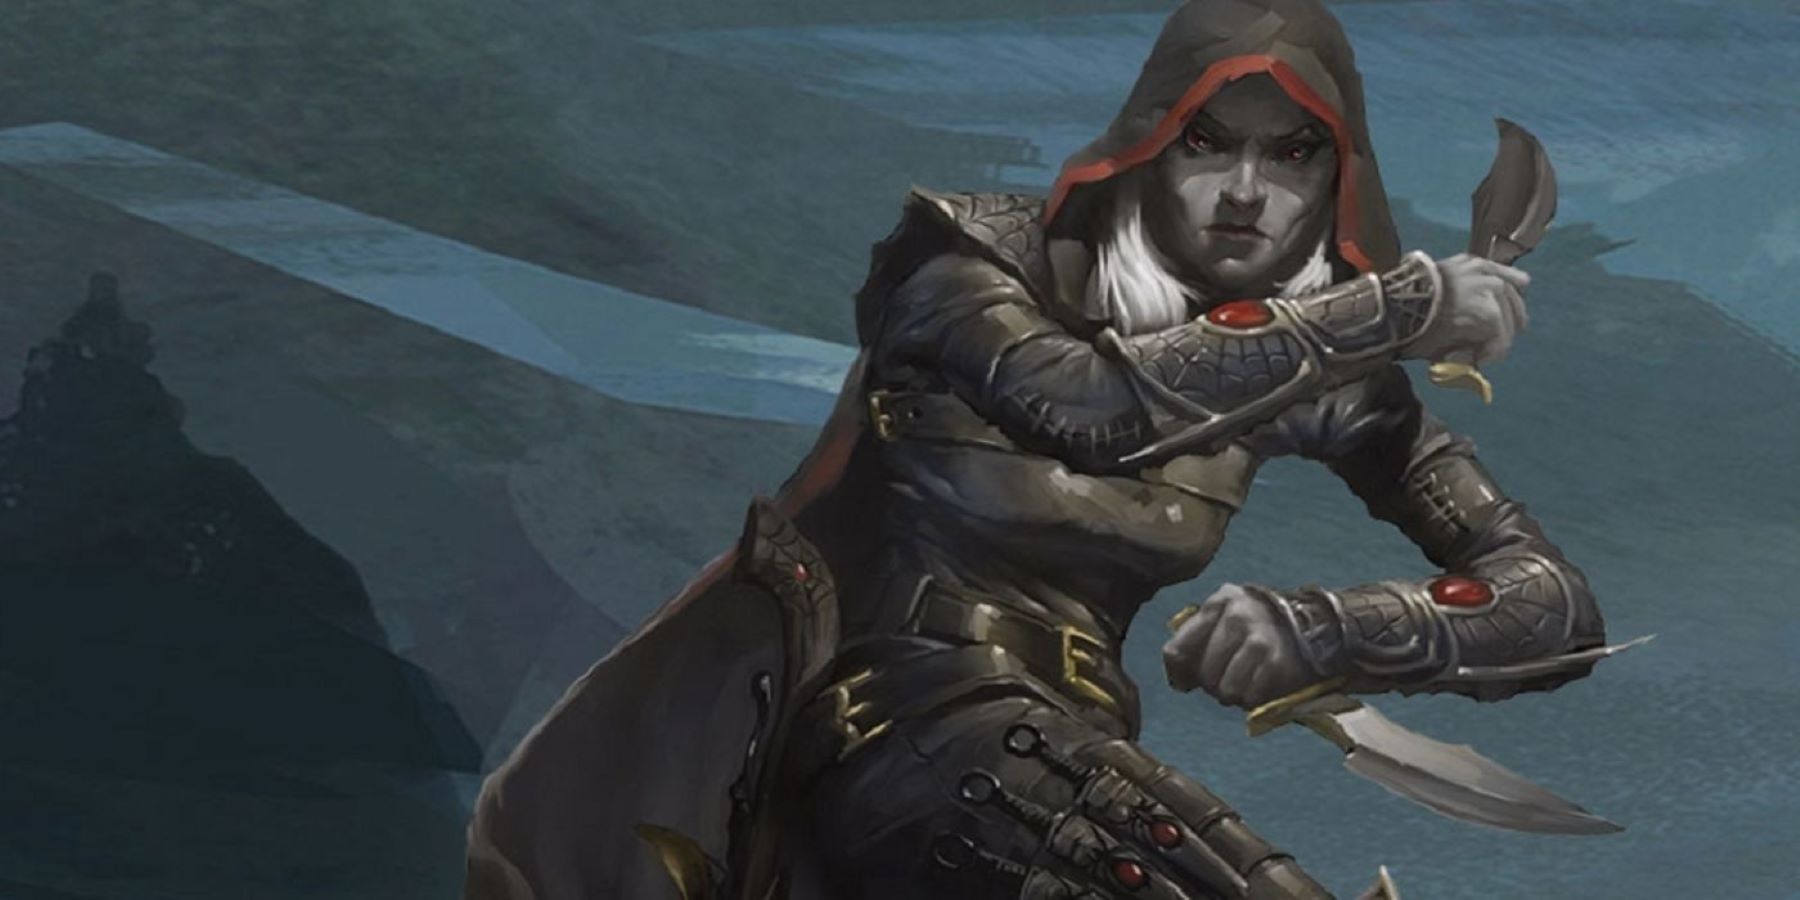 A drow rogue in official Dungeons and Dragons 5e art